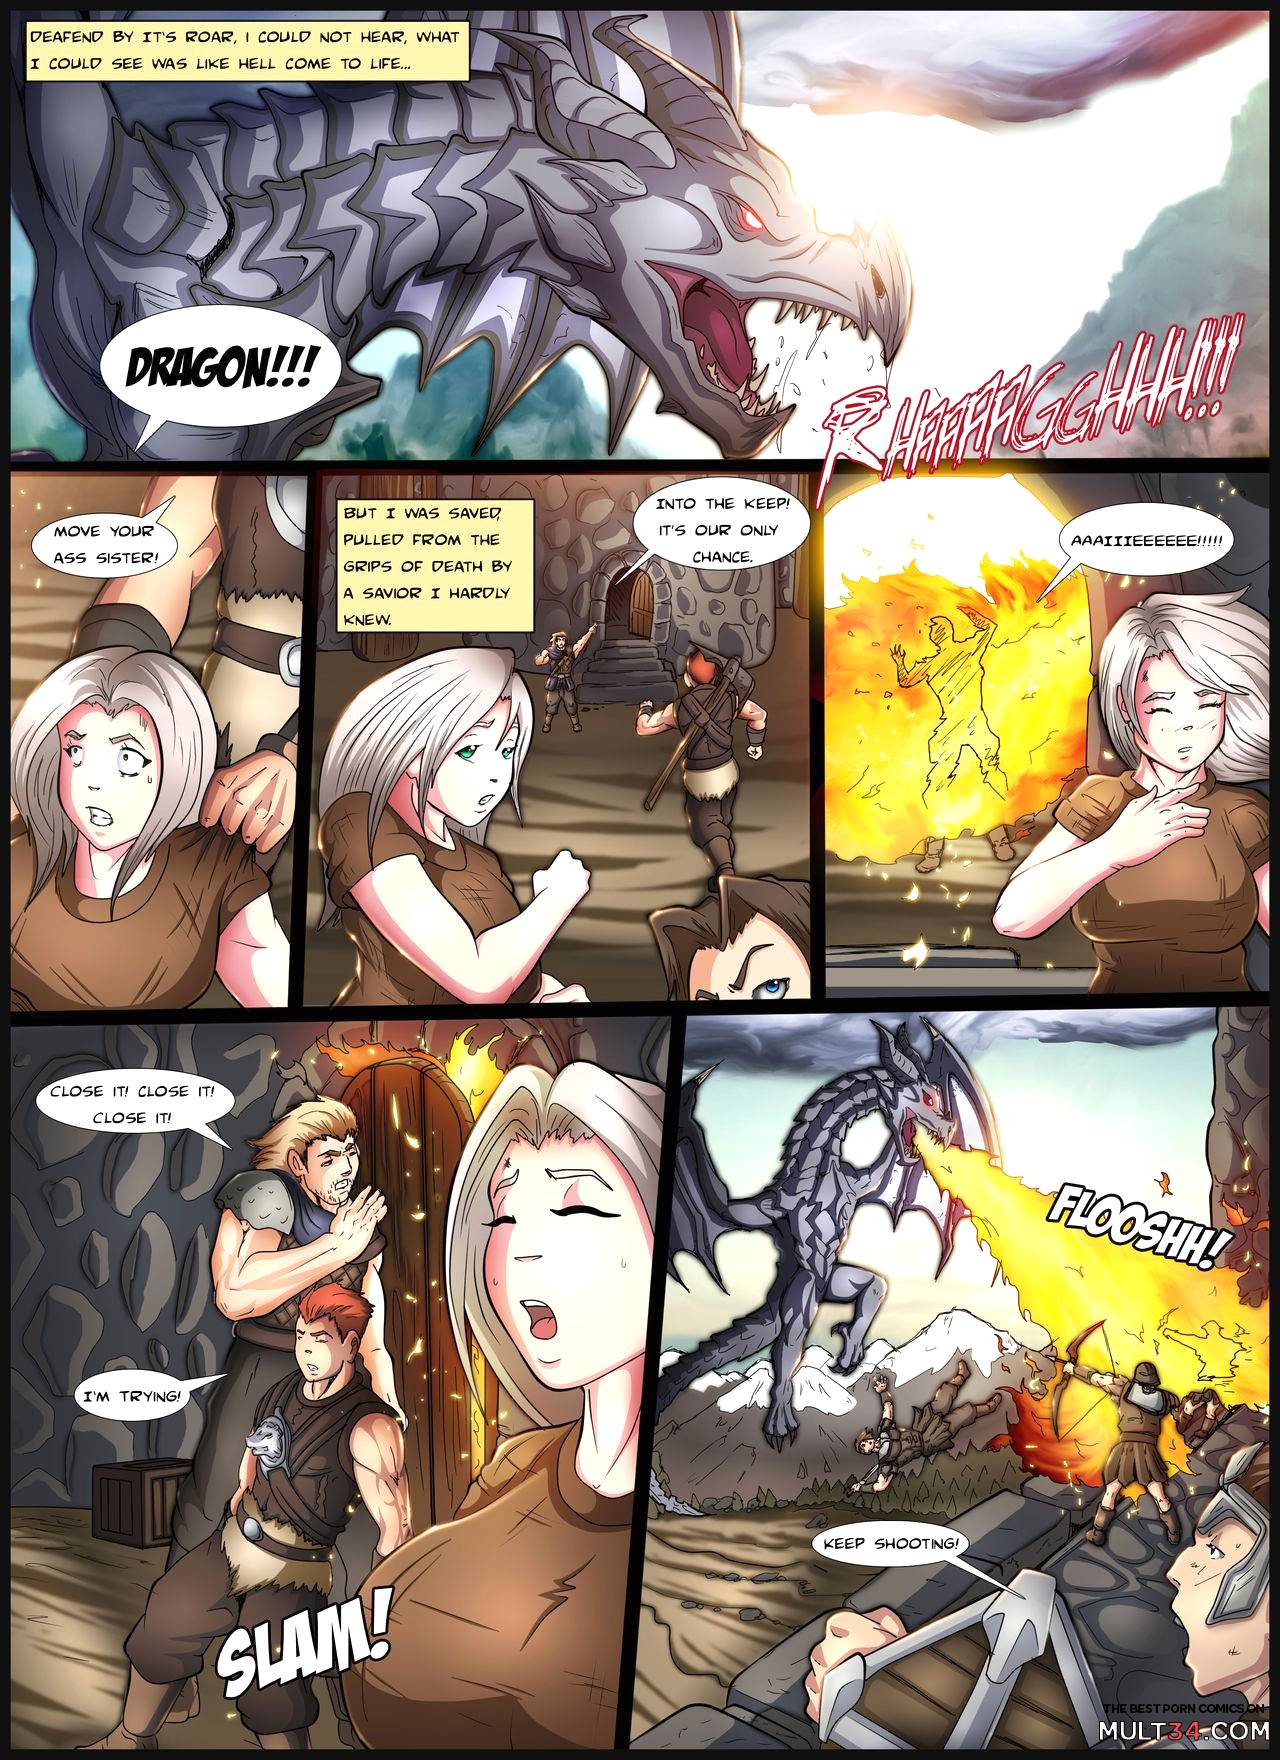 Skyrift #1 page 3